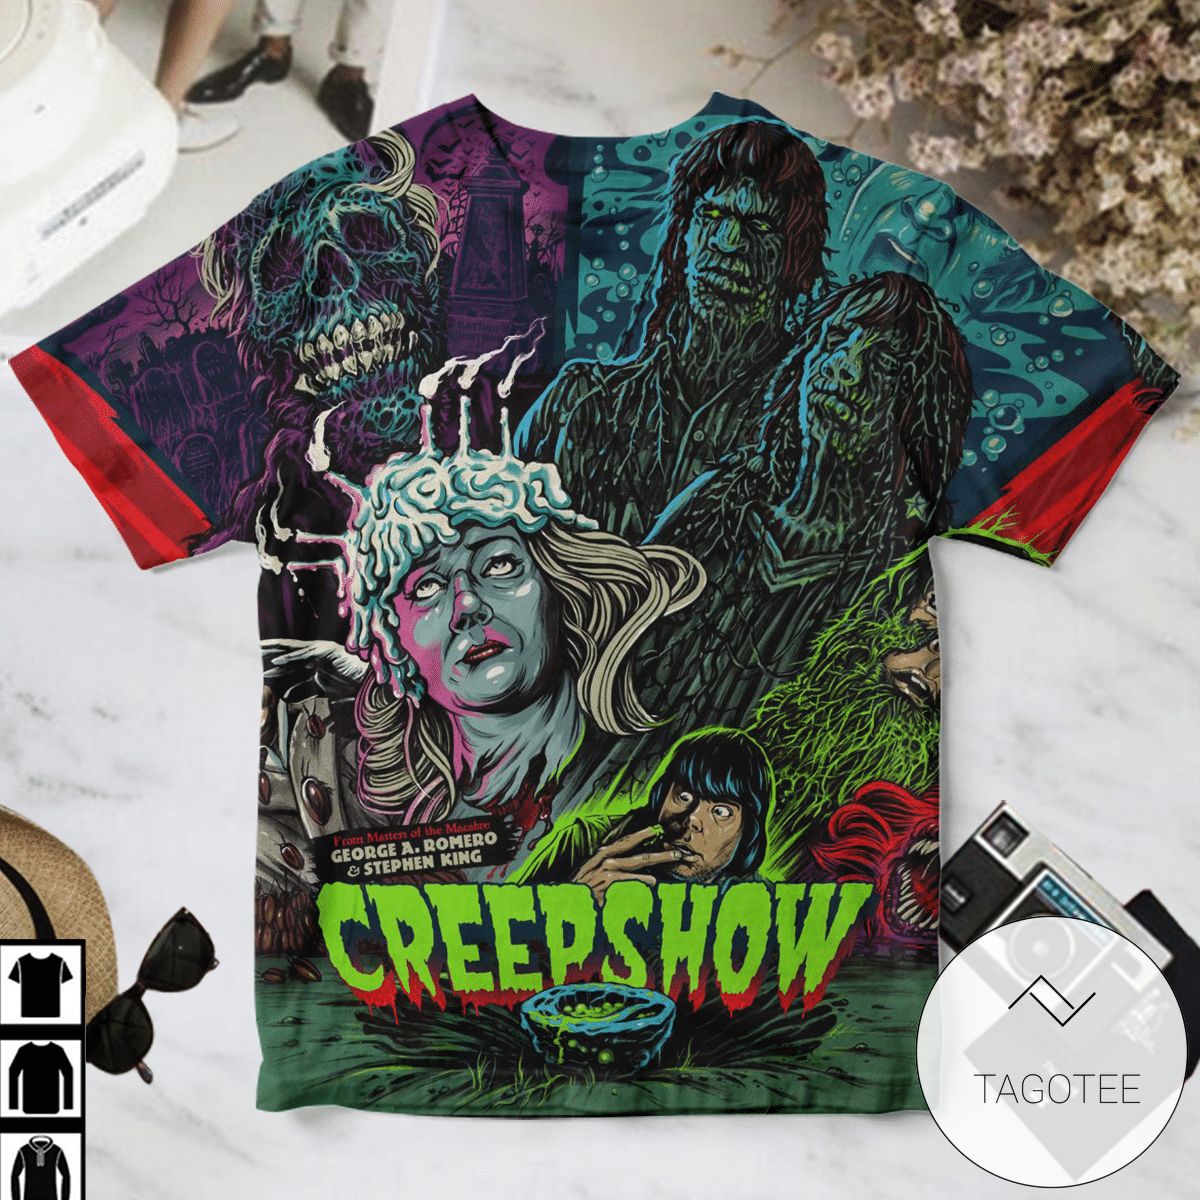 Creepshow Movie From George A. Romero And Stephen King Shirt